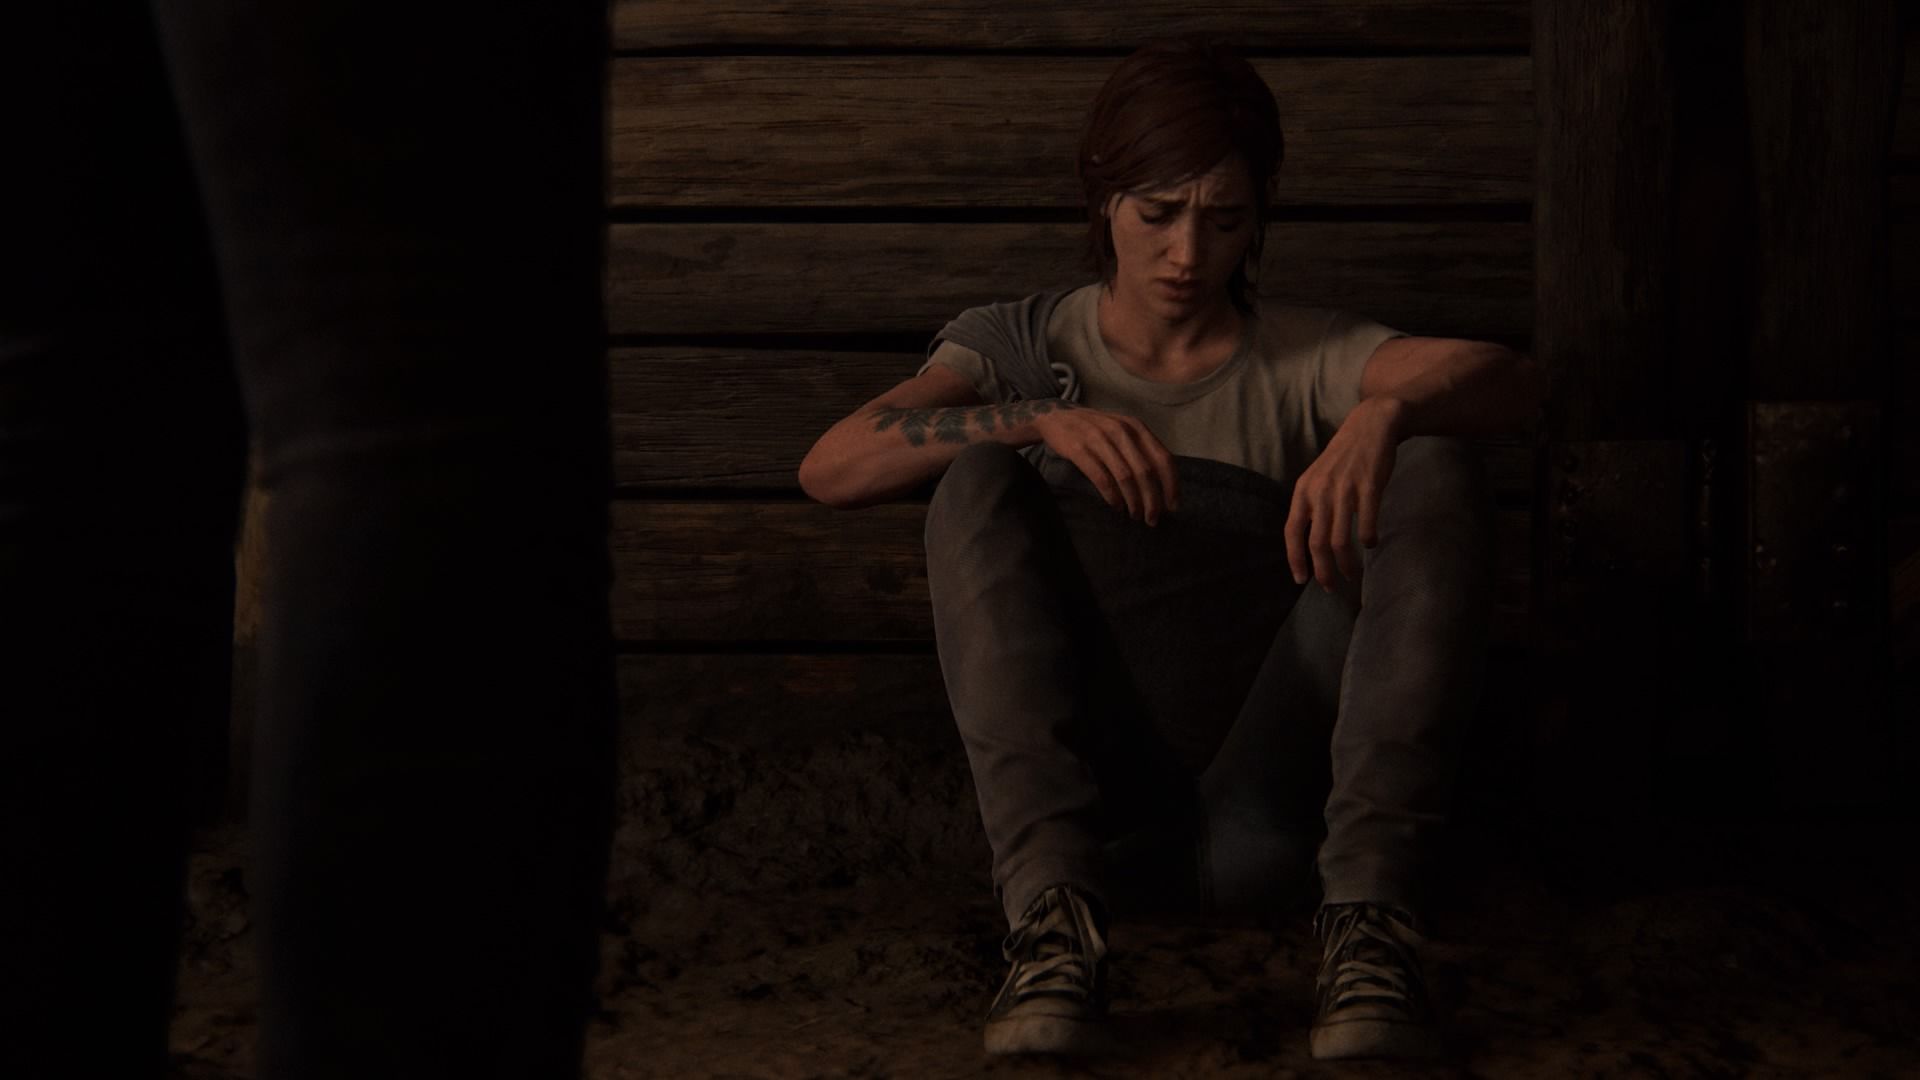 Last of Us Part 2' Ending Explained: What Does the Butterfly Moth Mean?